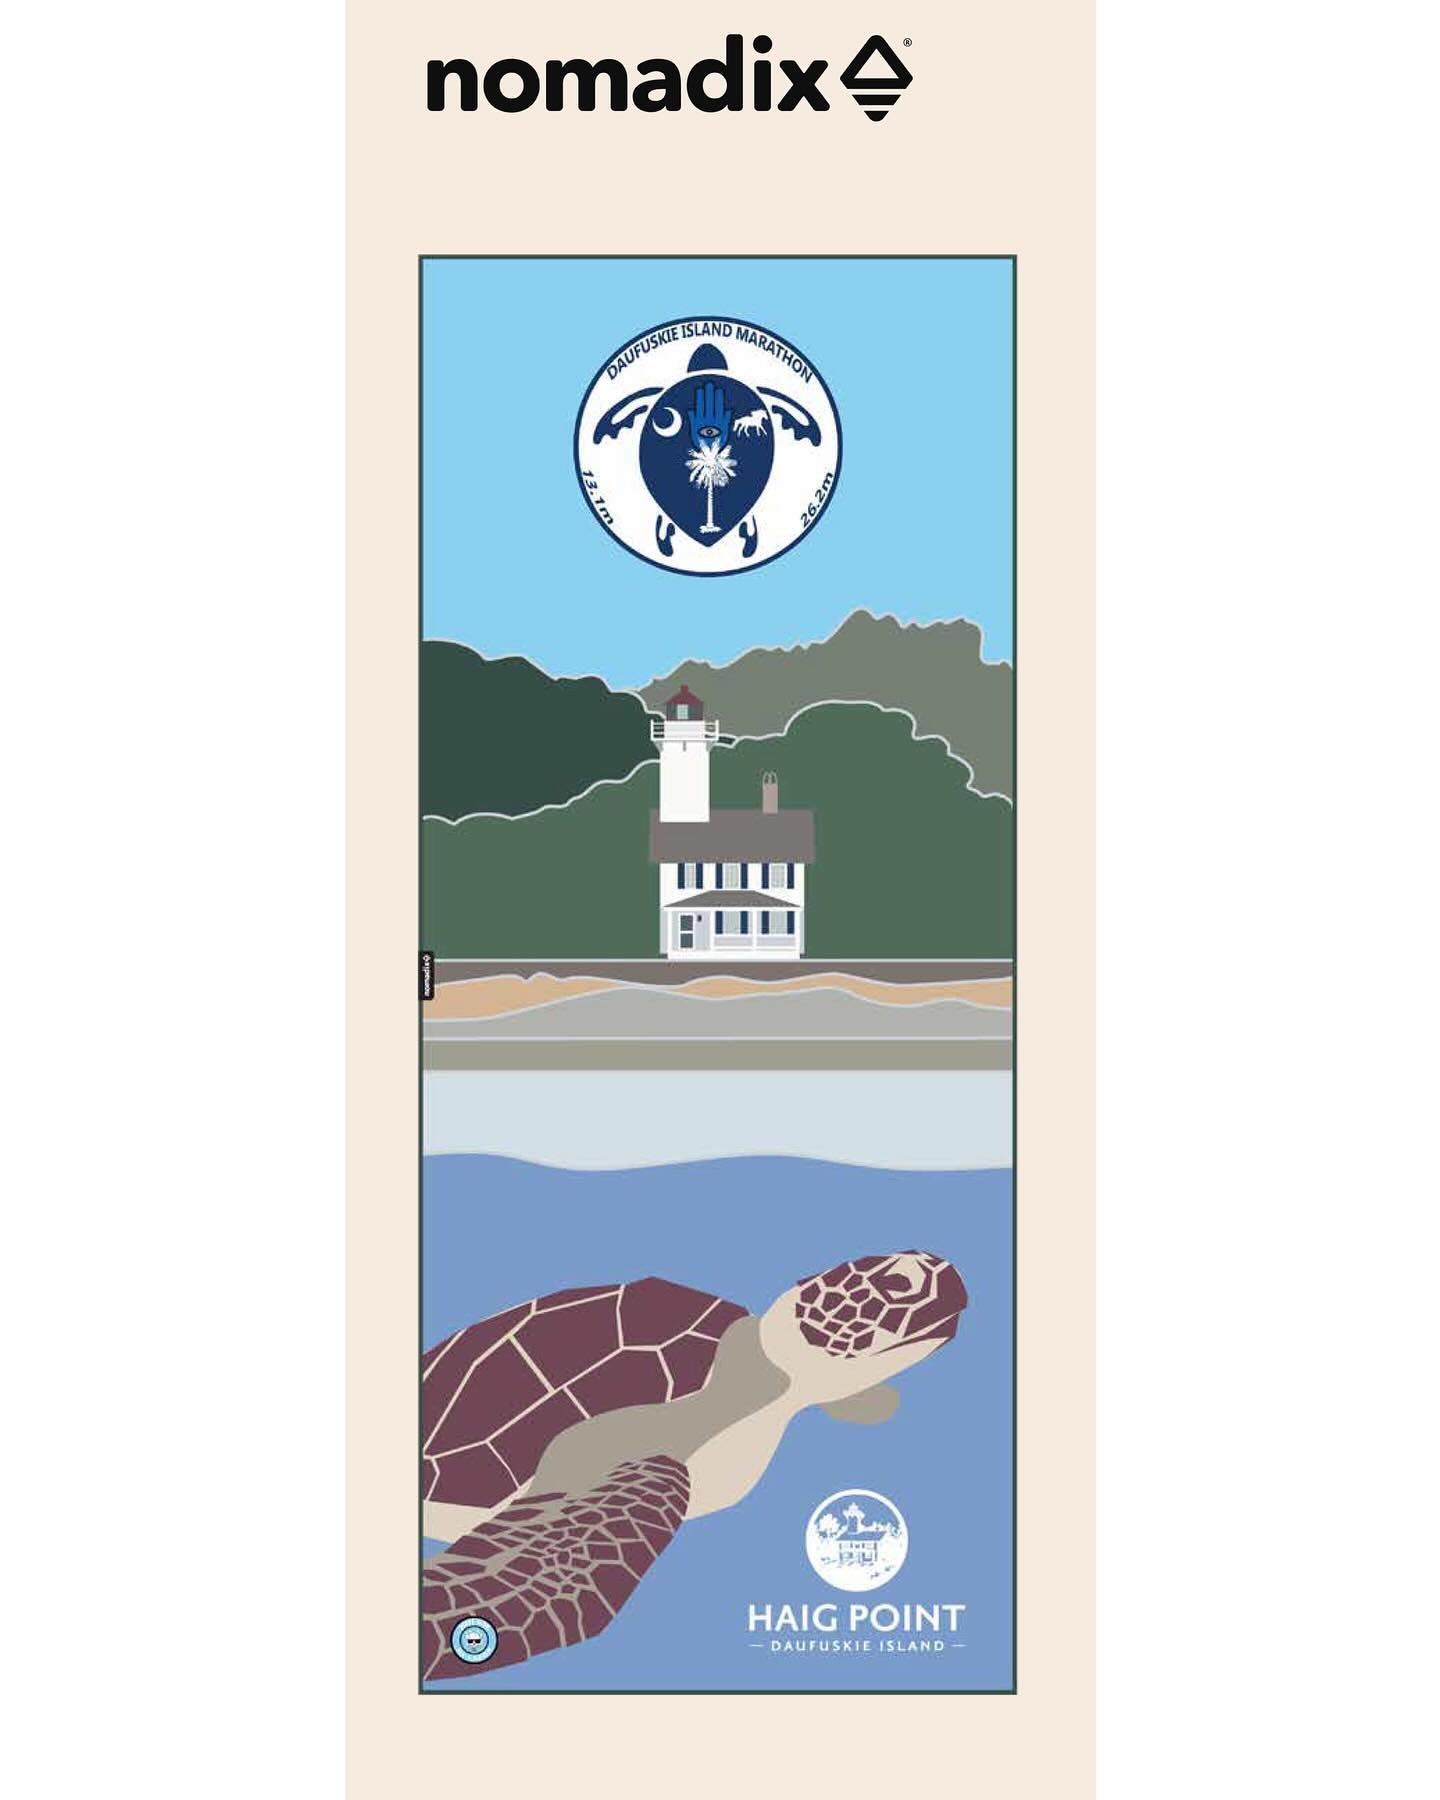 Here&rsquo;s the swag towel proof for the 2025 Daufuskie Island Marathon and Half!
It&rsquo;s a 72&rdquo;L x 30&rdquo;W @nomadixco towel! Every registered runner will get one of these! 
Nomadix makes gorgeous towels! You&rsquo;re gonna love these!
Re